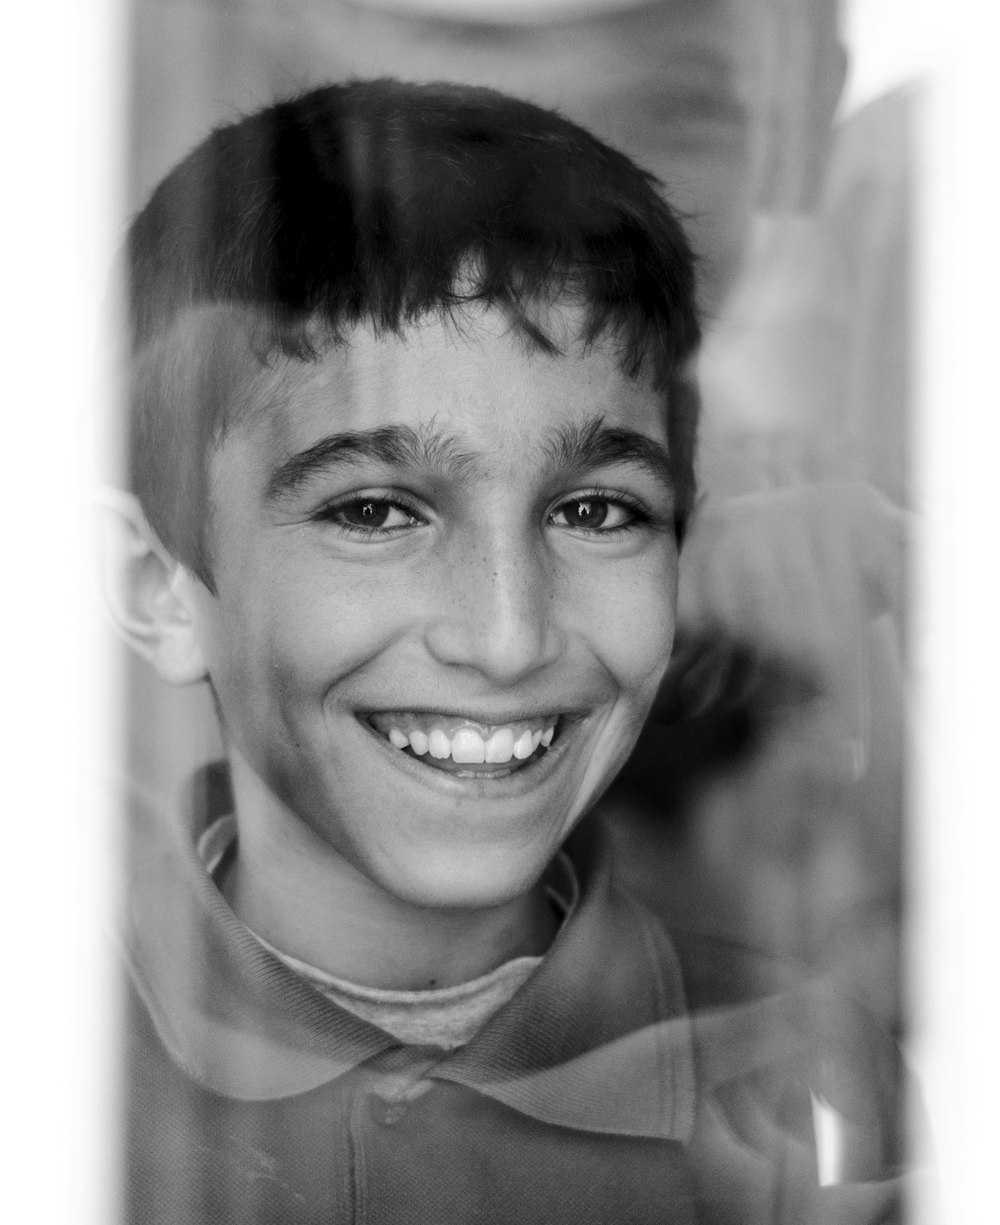 a black and white photo of a boy smiling